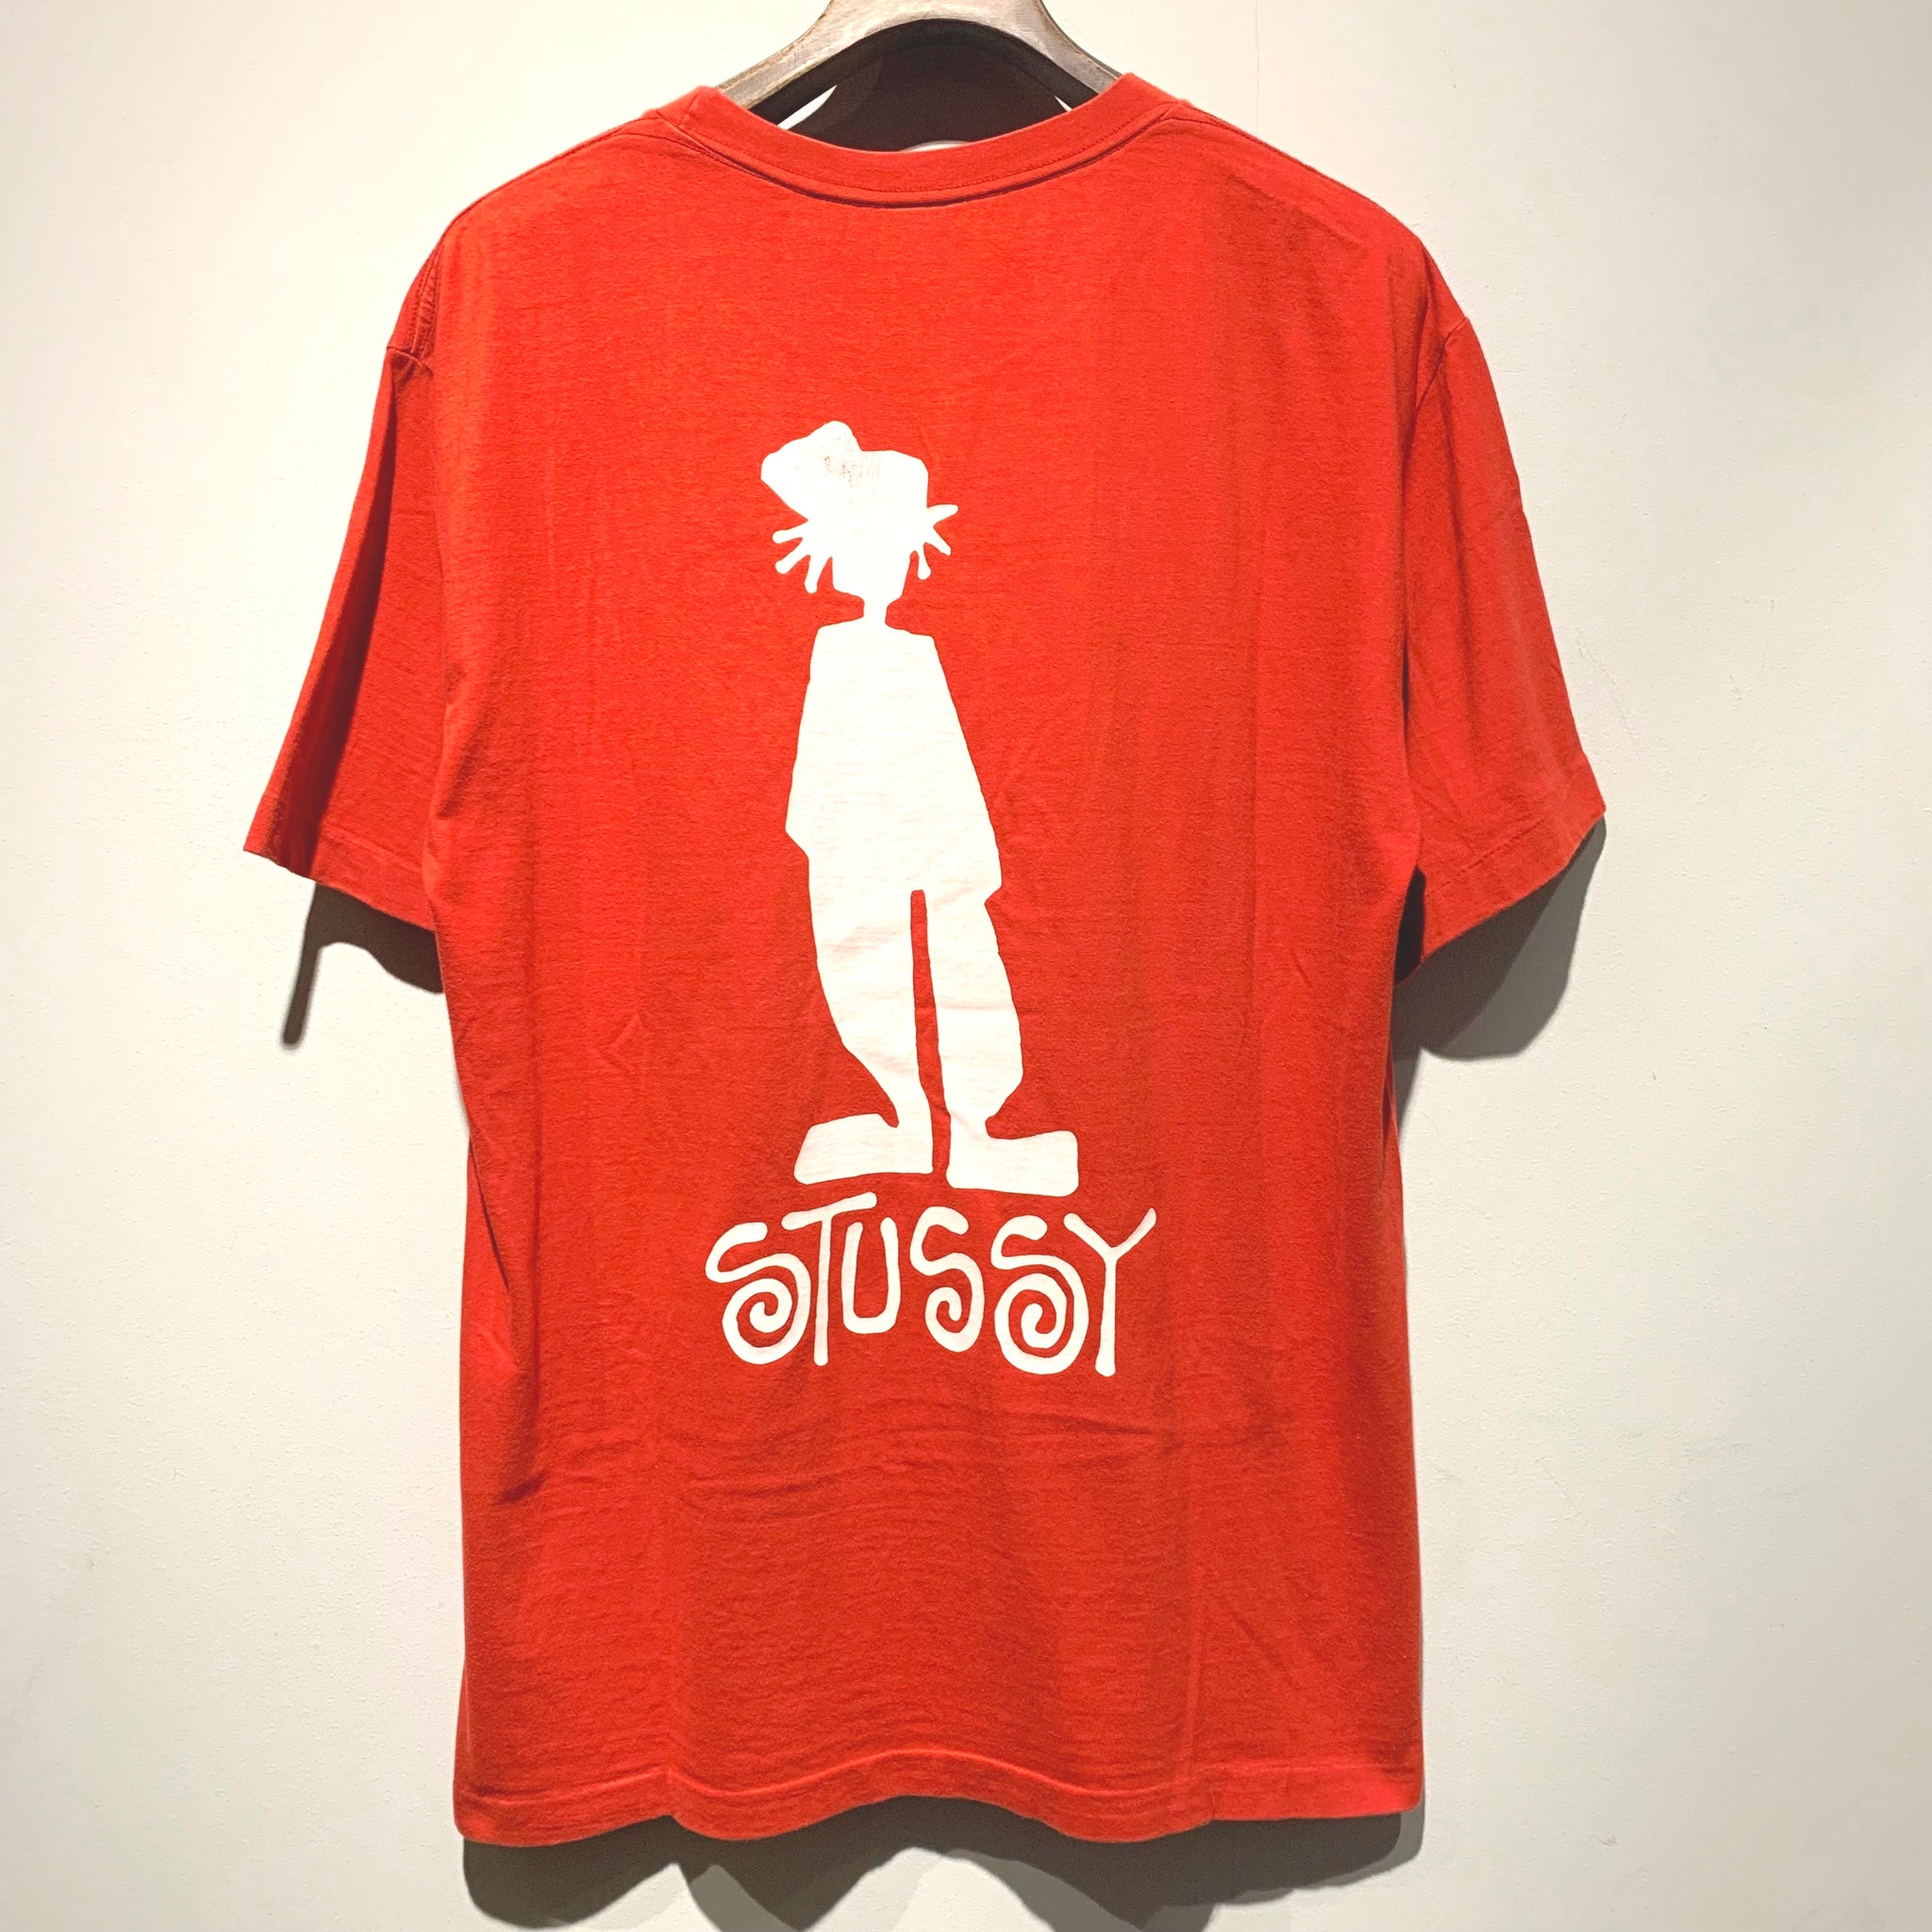 OLD STUSSY SHADOWMAN TEE MADE IN USAOLDSTUSSY